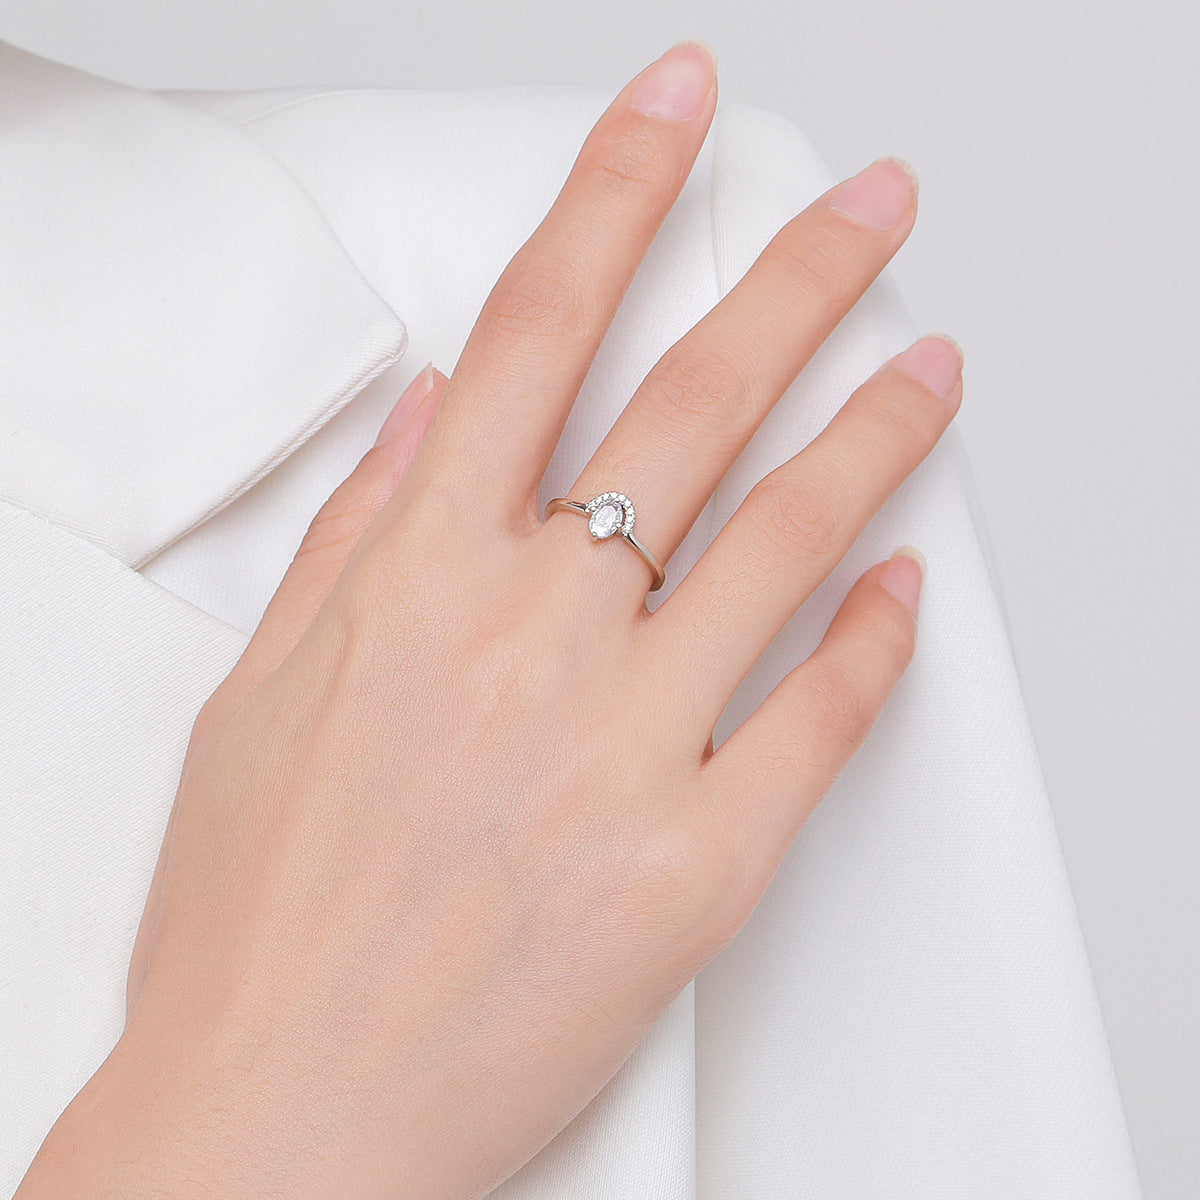 Minimalist Sterling Silver Zircon Ring for Women - Everyday Genie Collection